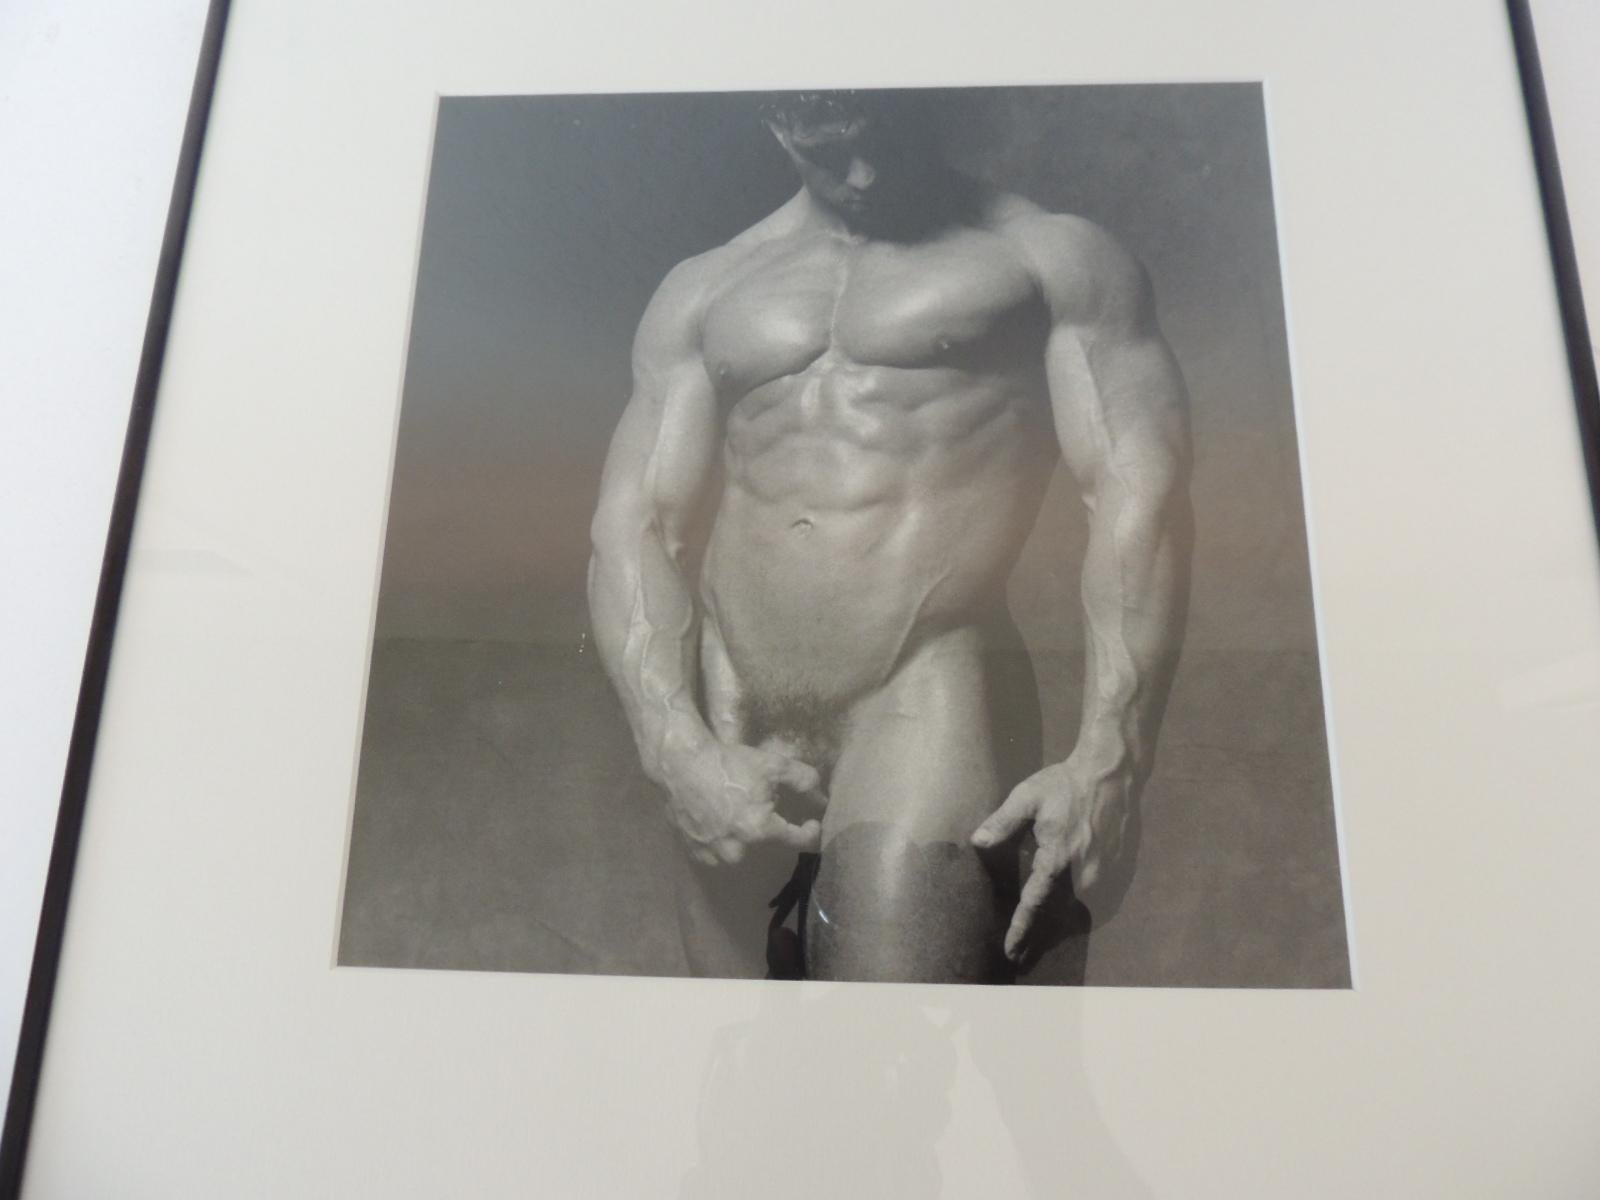 Nude black and white abstract photograph of muscular male standing flexing.
Black metal frame and museum quality white mat.
(glass)
Found in New York City.
Size of photo: 10